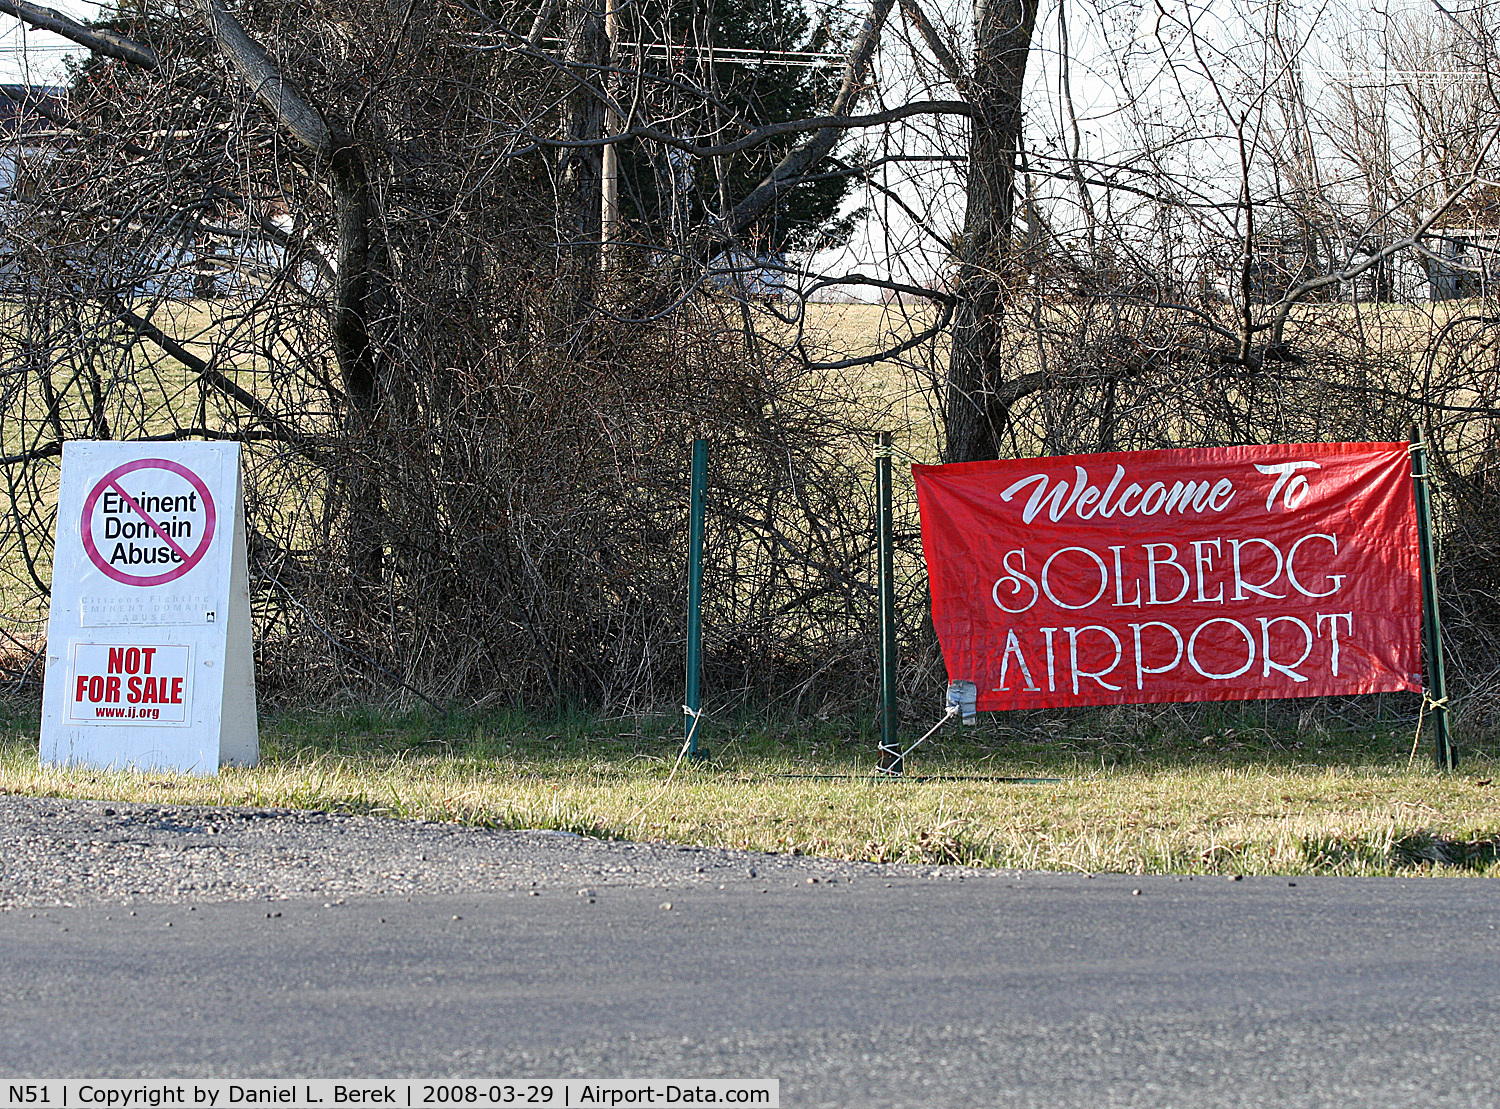 Solberg-hunterdon Airport (N51) - With Twin Pines now history, hungry developers are now eyeing this lovely Central Jersey airport.  Eminent domain is a popular tactic among develpers and their well-connected attorneys.  Please don't let this airport die!